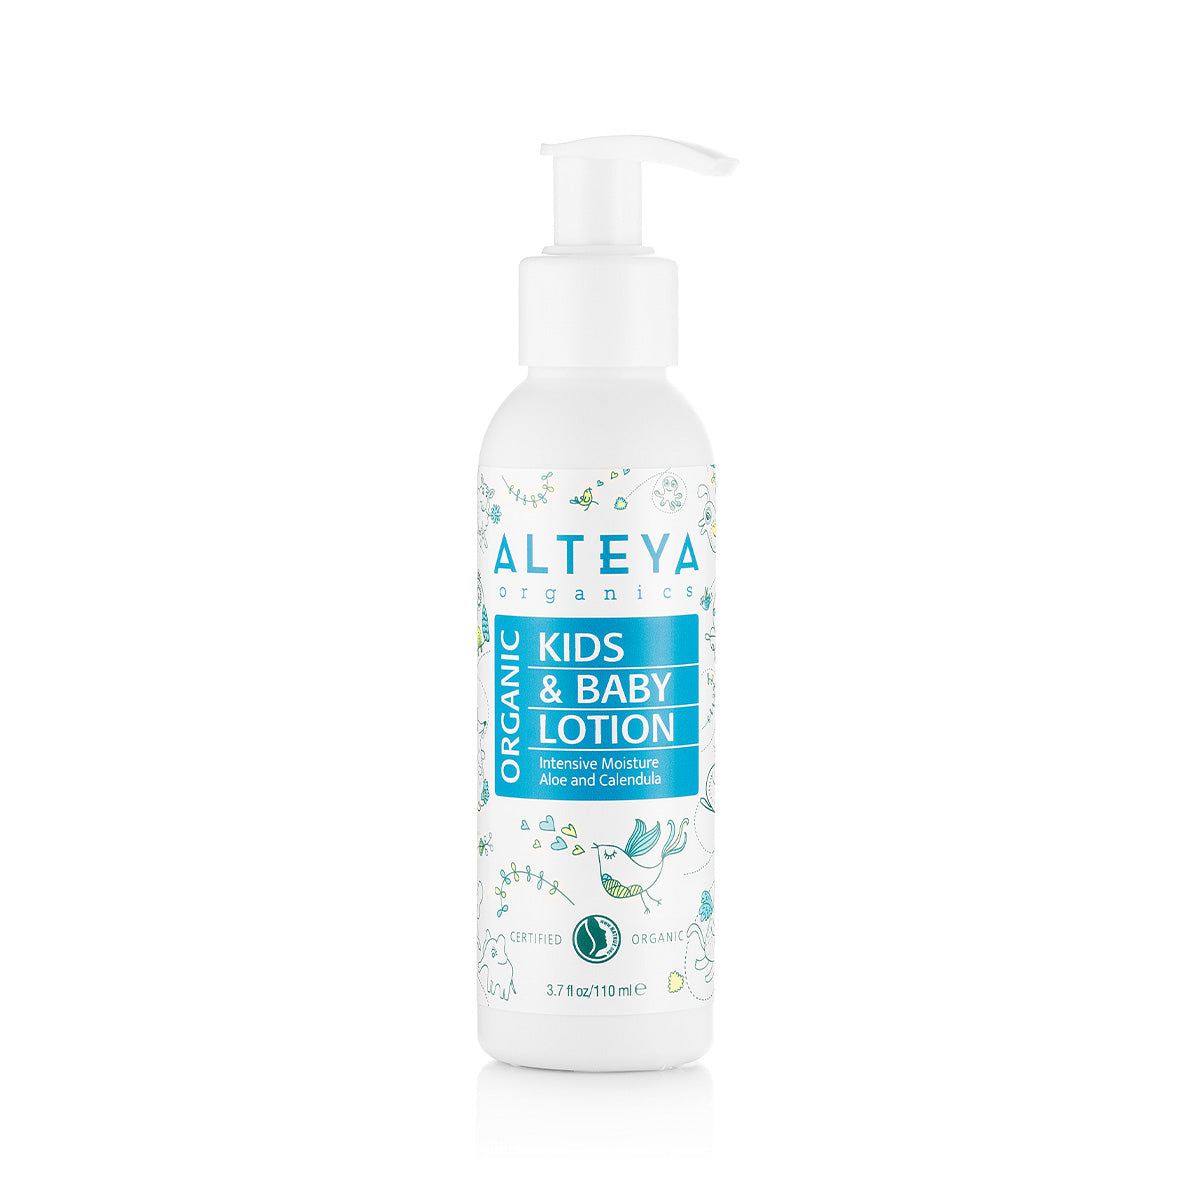 A bottle of Alteya Organics certified organic baby body lotion on a white background.